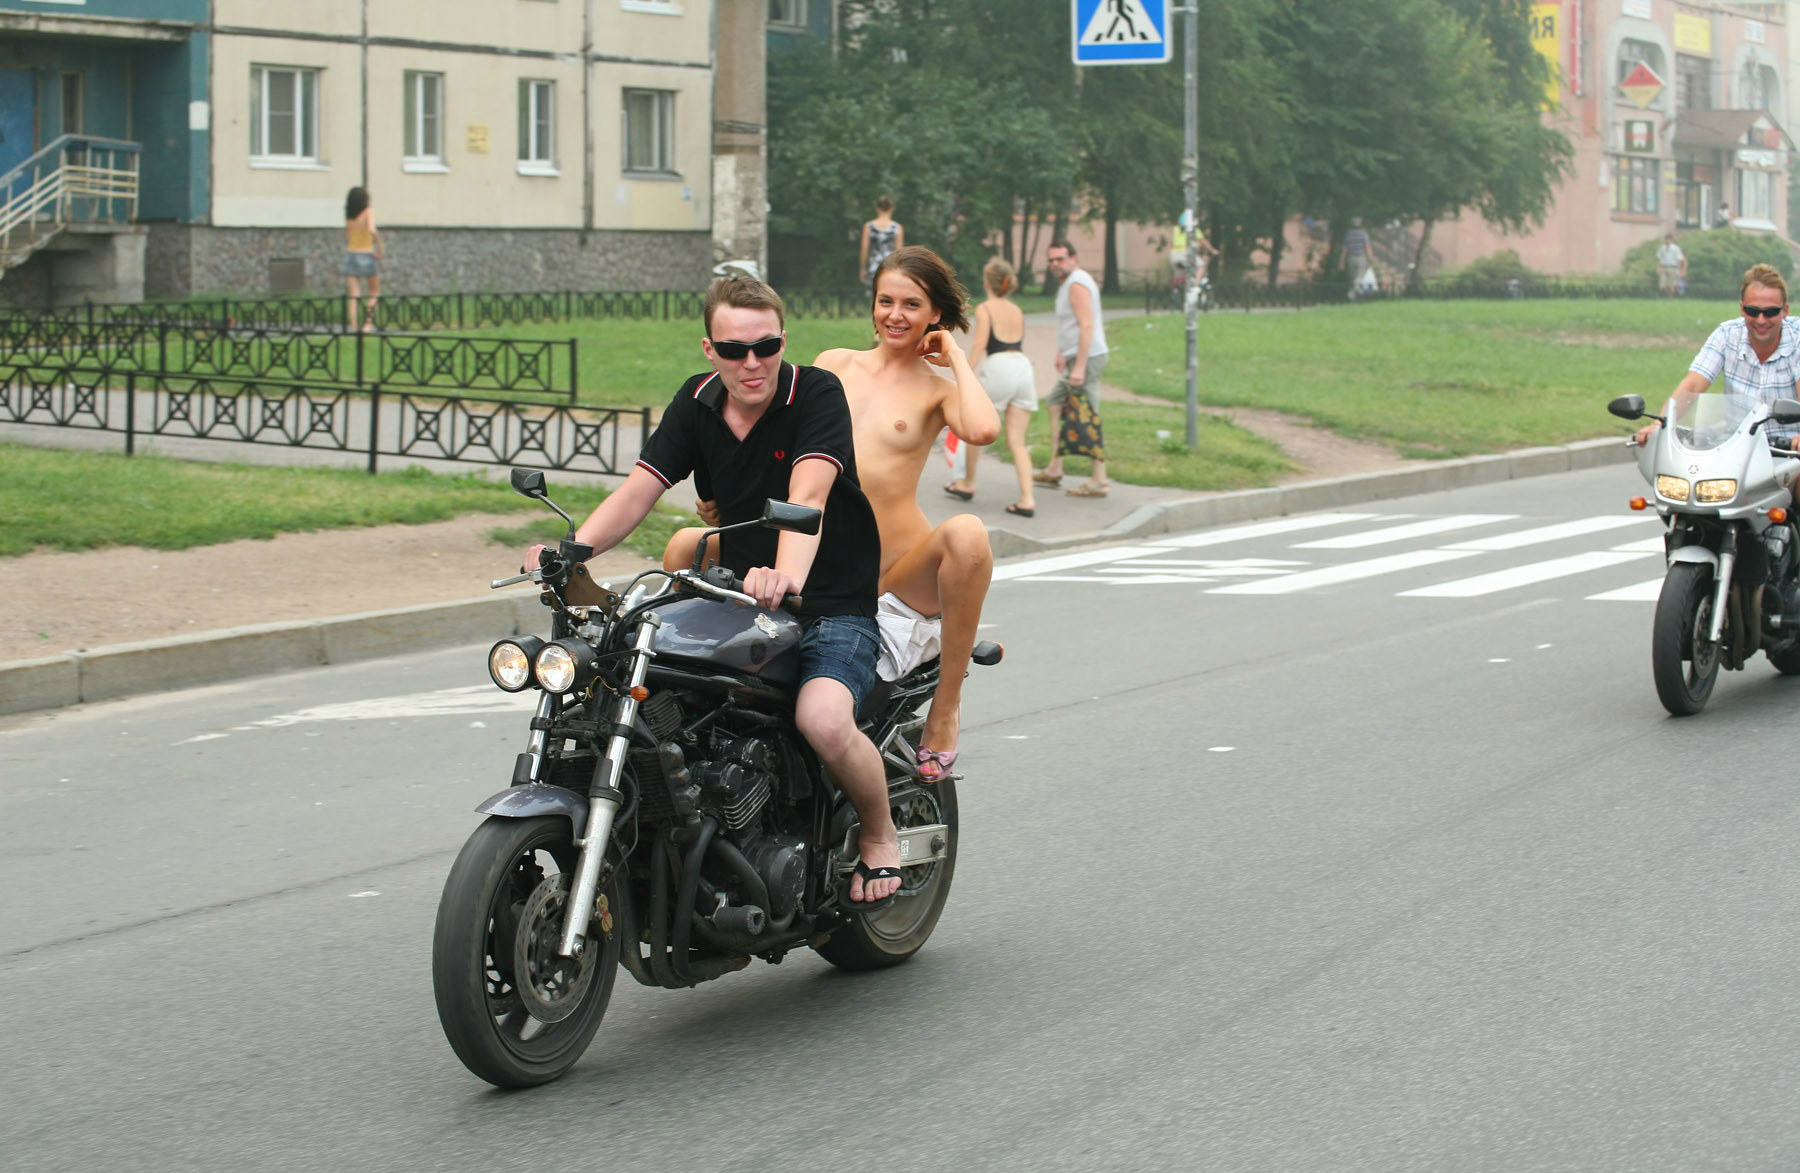 Pic Woman Riding Motorcycle Naked